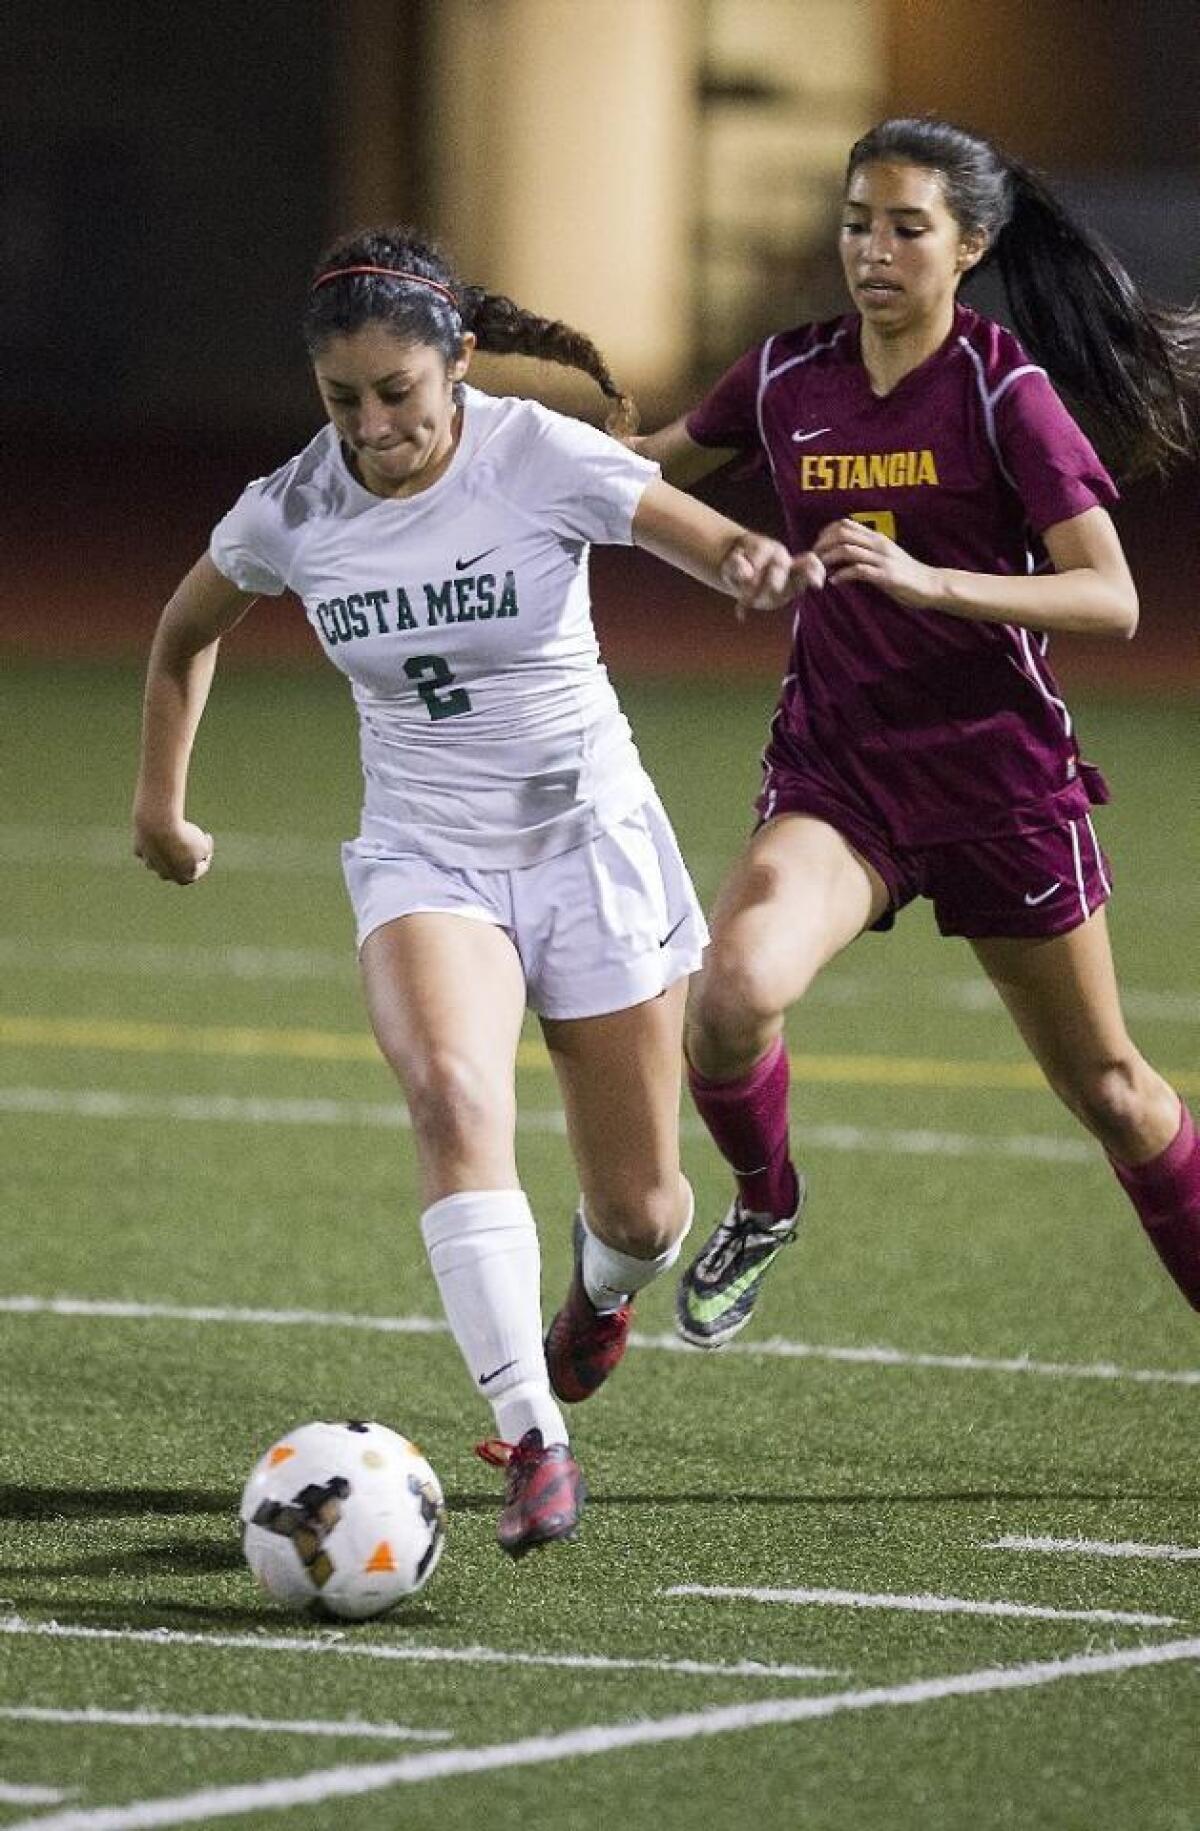 Emily Olvera competes for the Costa Mesa High girls' soccer team in 2016.